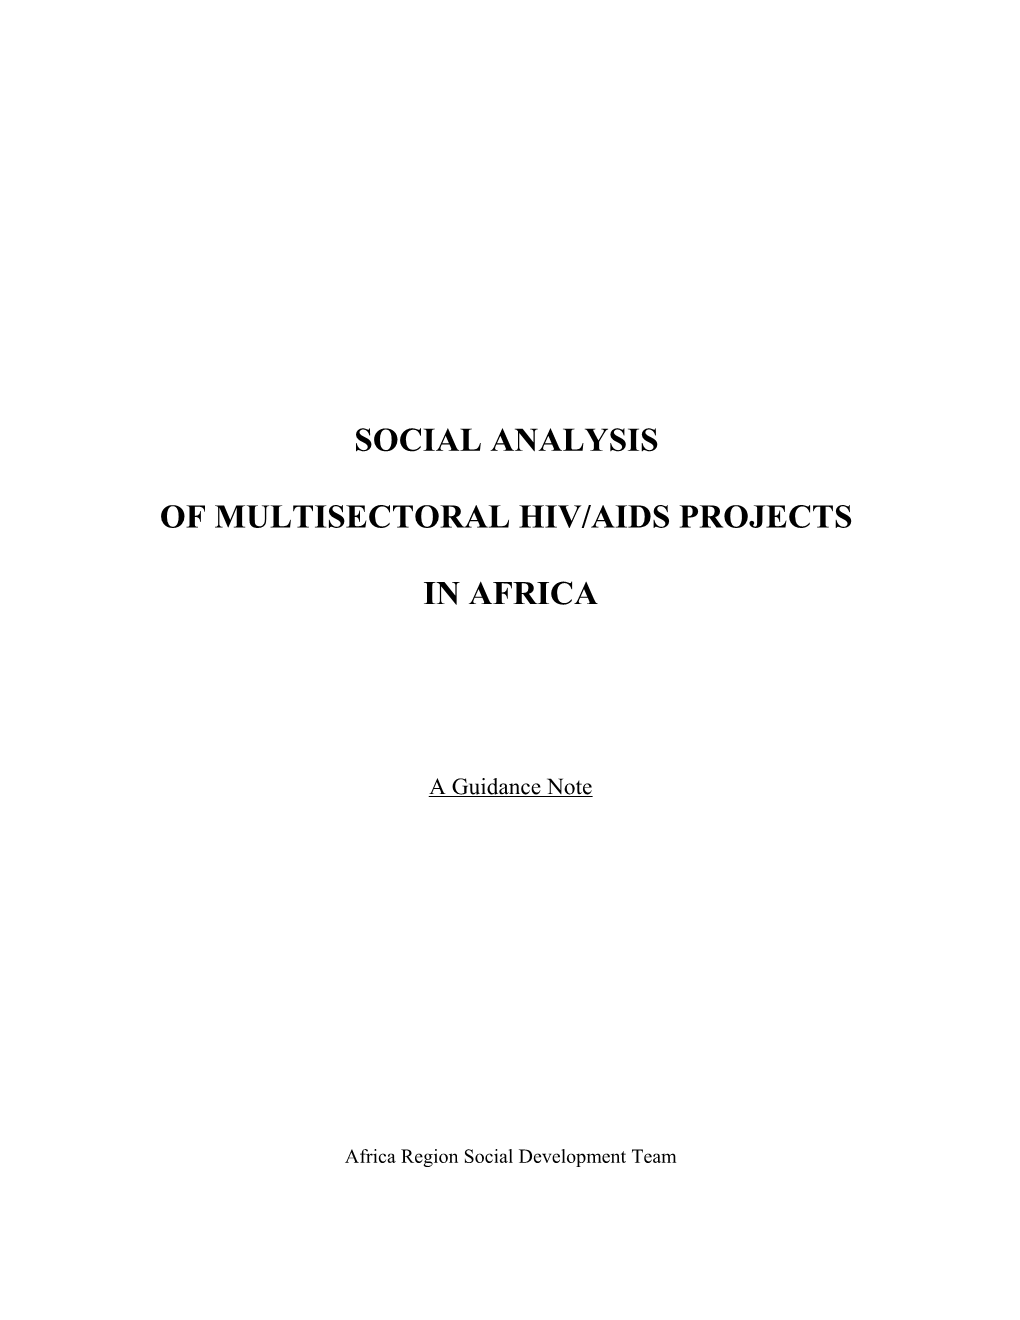 Social Dimensions of Multisectoral Hiv/Aids Projects in Africa